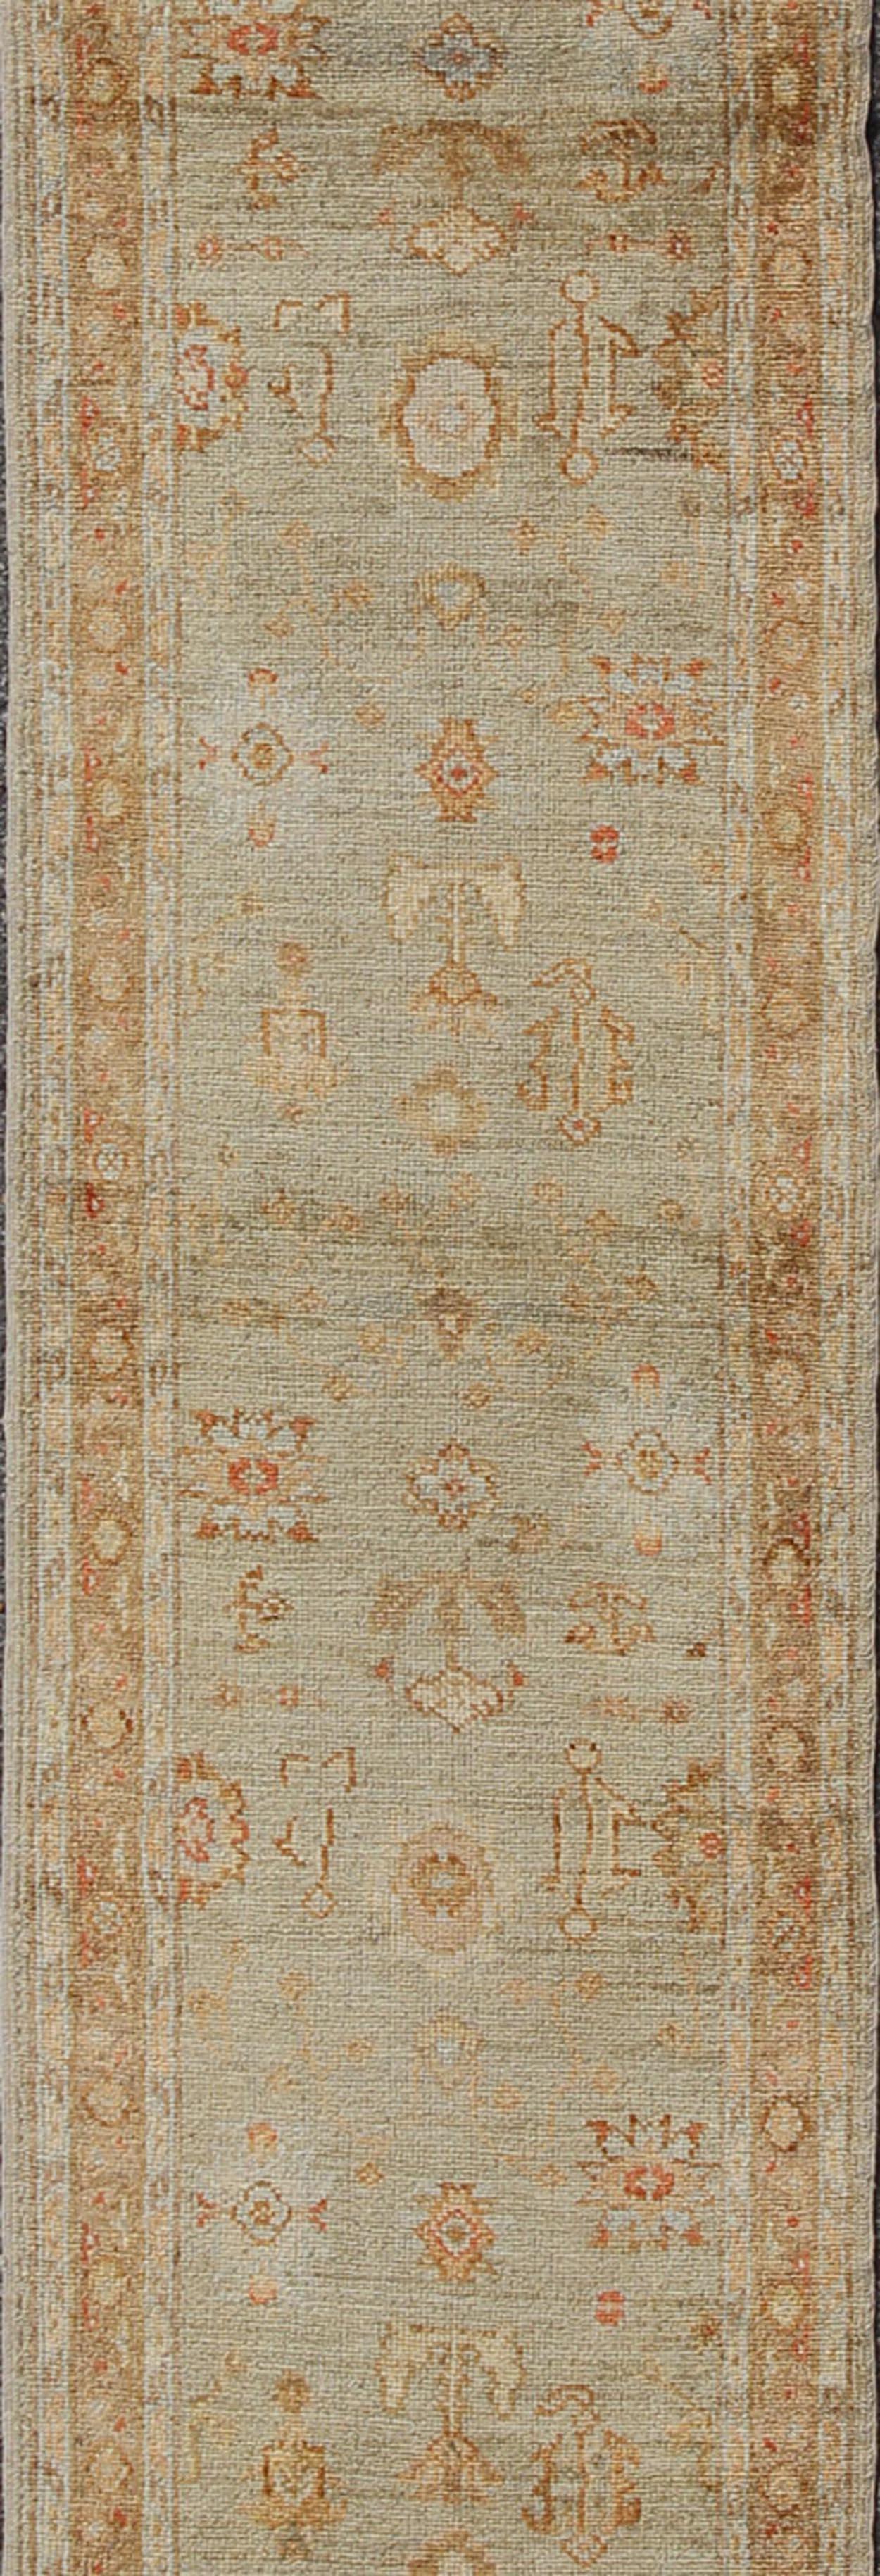 Turkish Angora Oushak runner with traditional and elegant traditional medallion design, rug AN-97757, country of origin / type: Turkey / Oushak

This traditional Oushak runner from Turkey features a subdued, color palette and an elegant design,